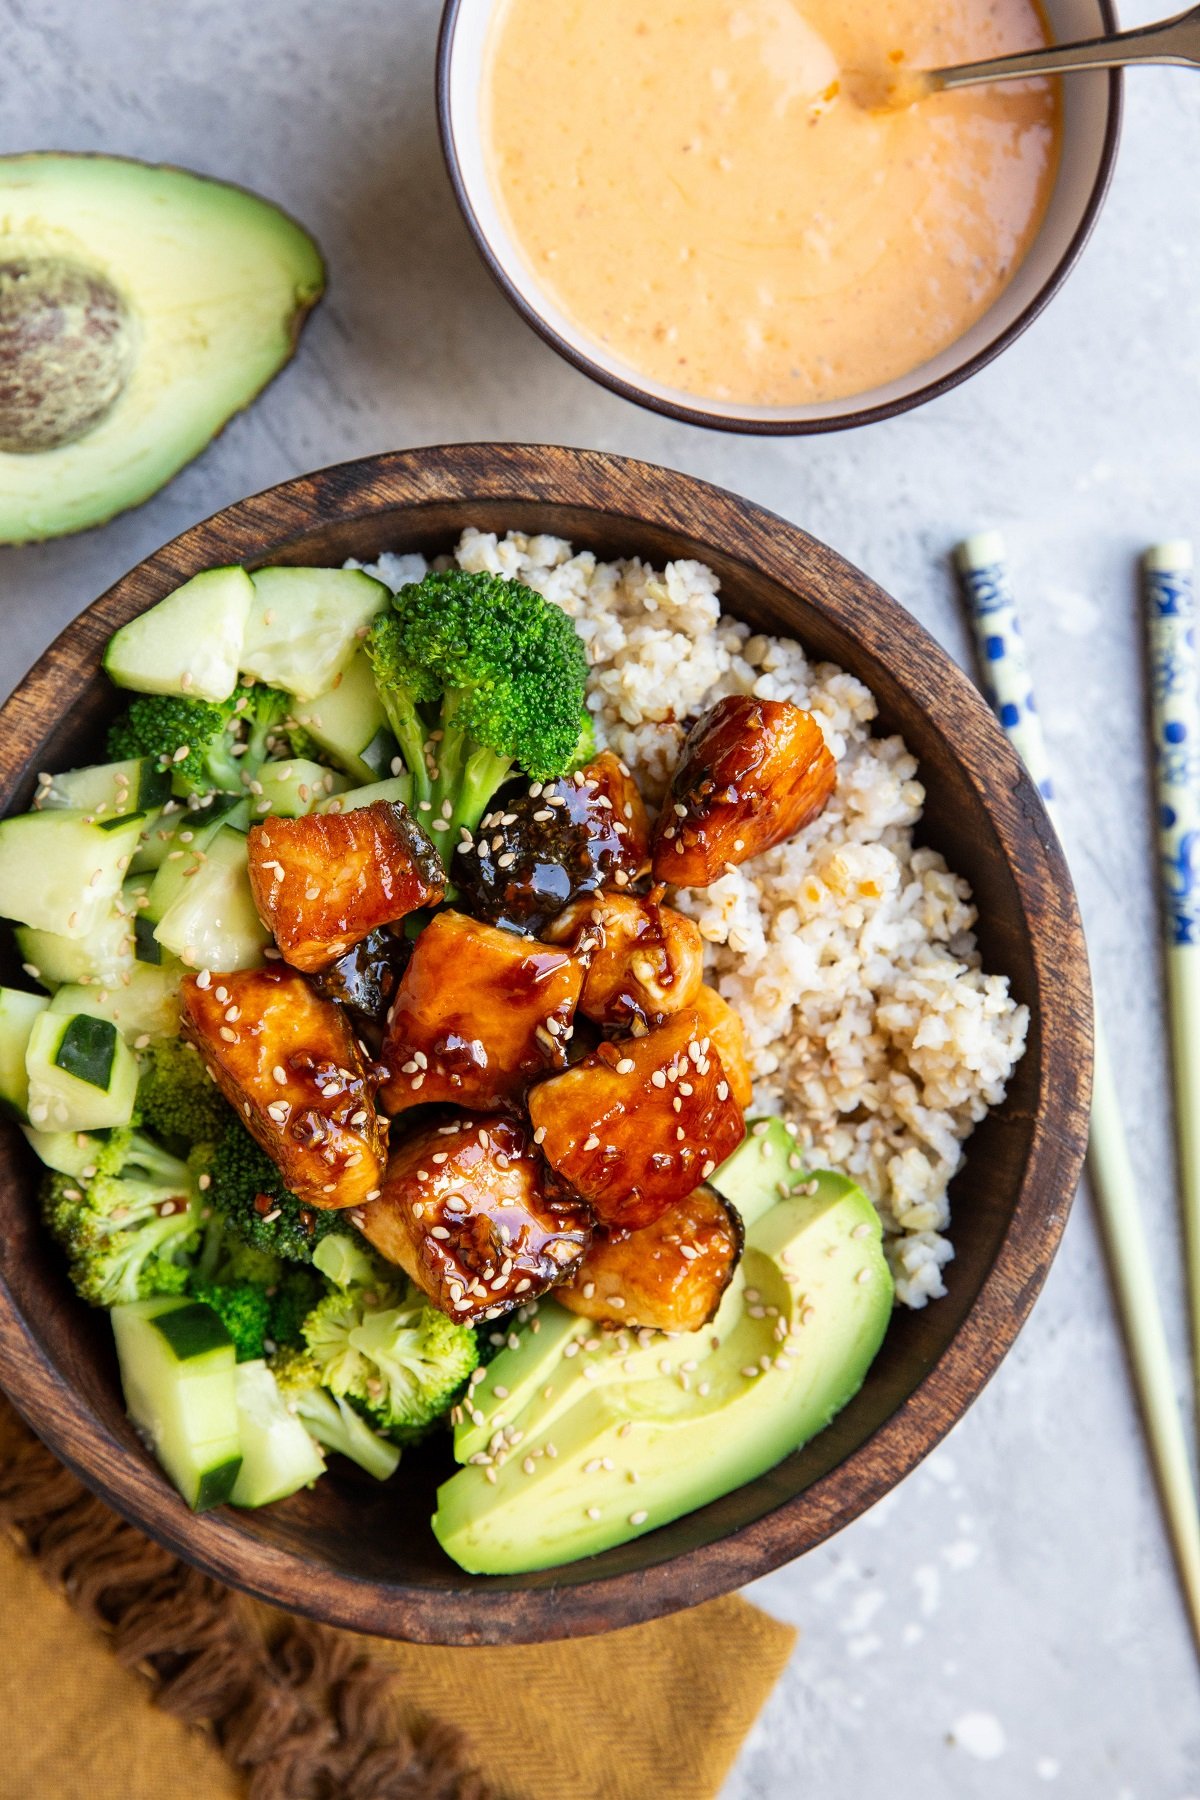 Bowl of salmon bites and vegetables with bang bang sauce to the side. Avocado, napkin and chop sticks to the side.